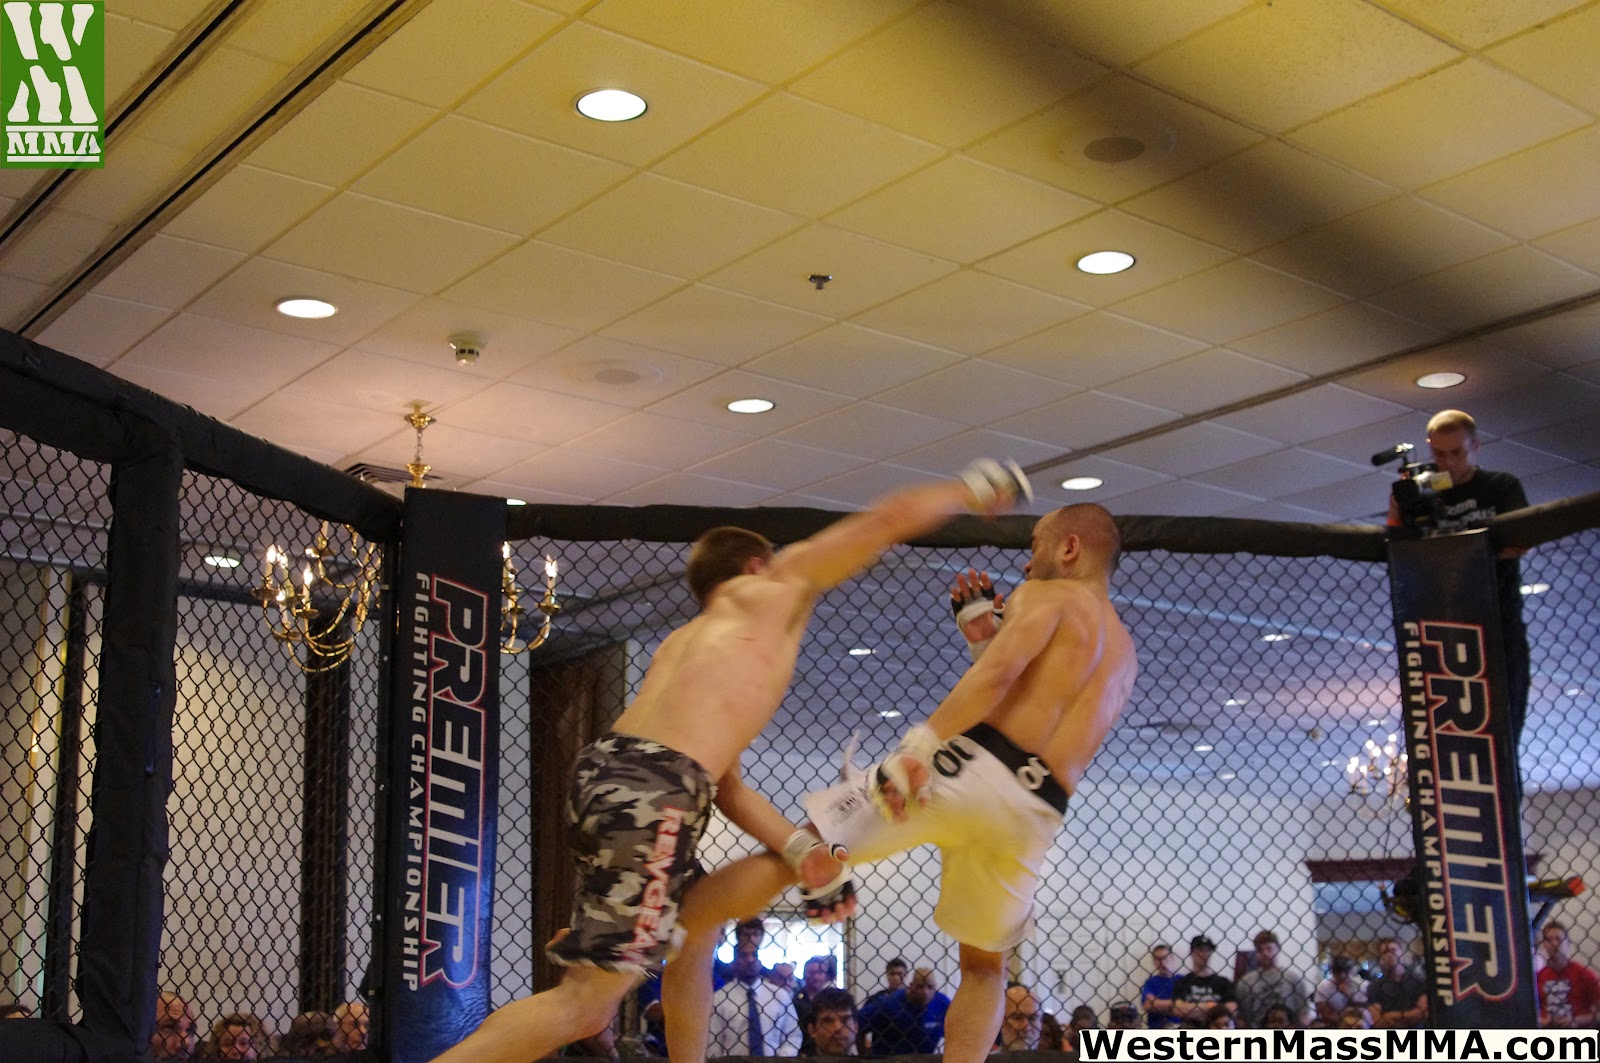 WesternMassMMA News, Reviews, Videos, Previews Premier FC 10 July 8th, 2012 Full Review